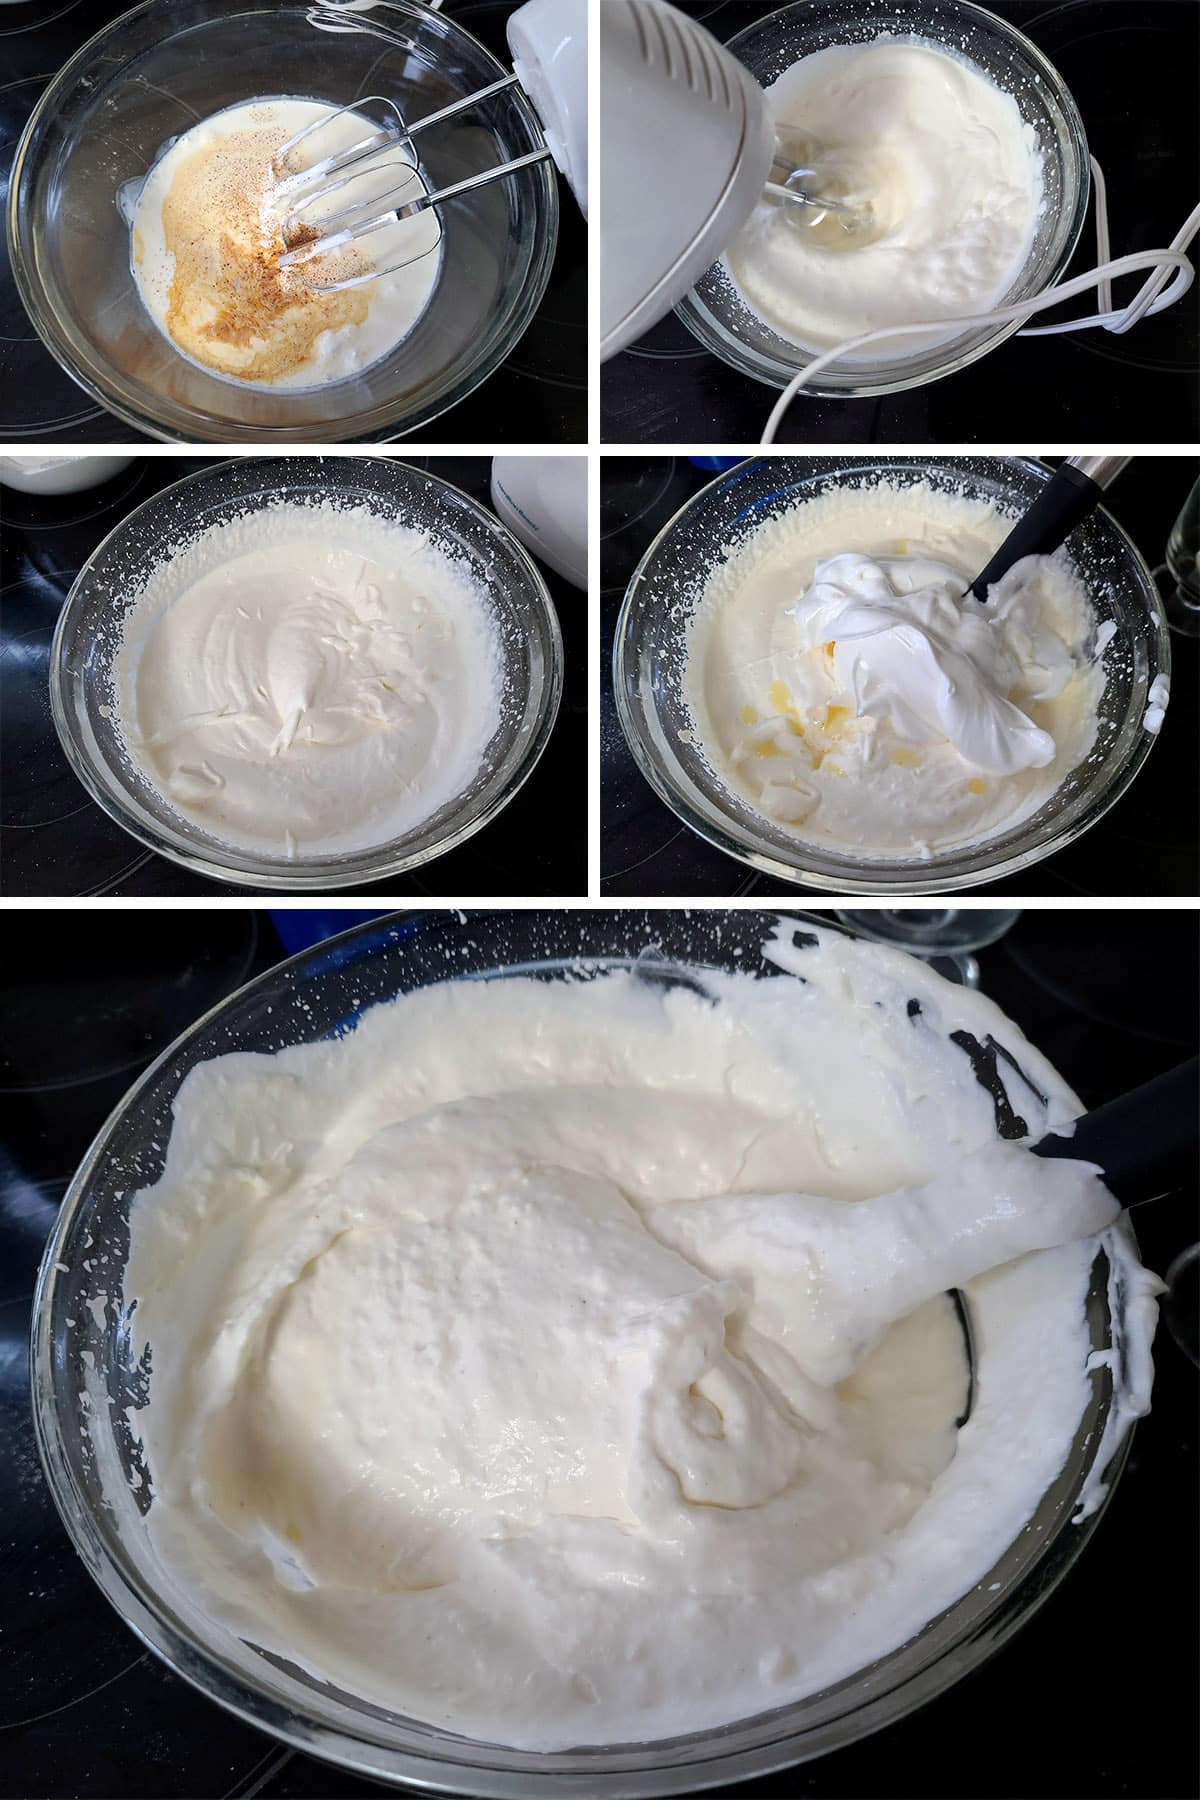 A 5 part image showing the heavy cream being whipped, then the egg whites and gelatin mixture being added and folded in.